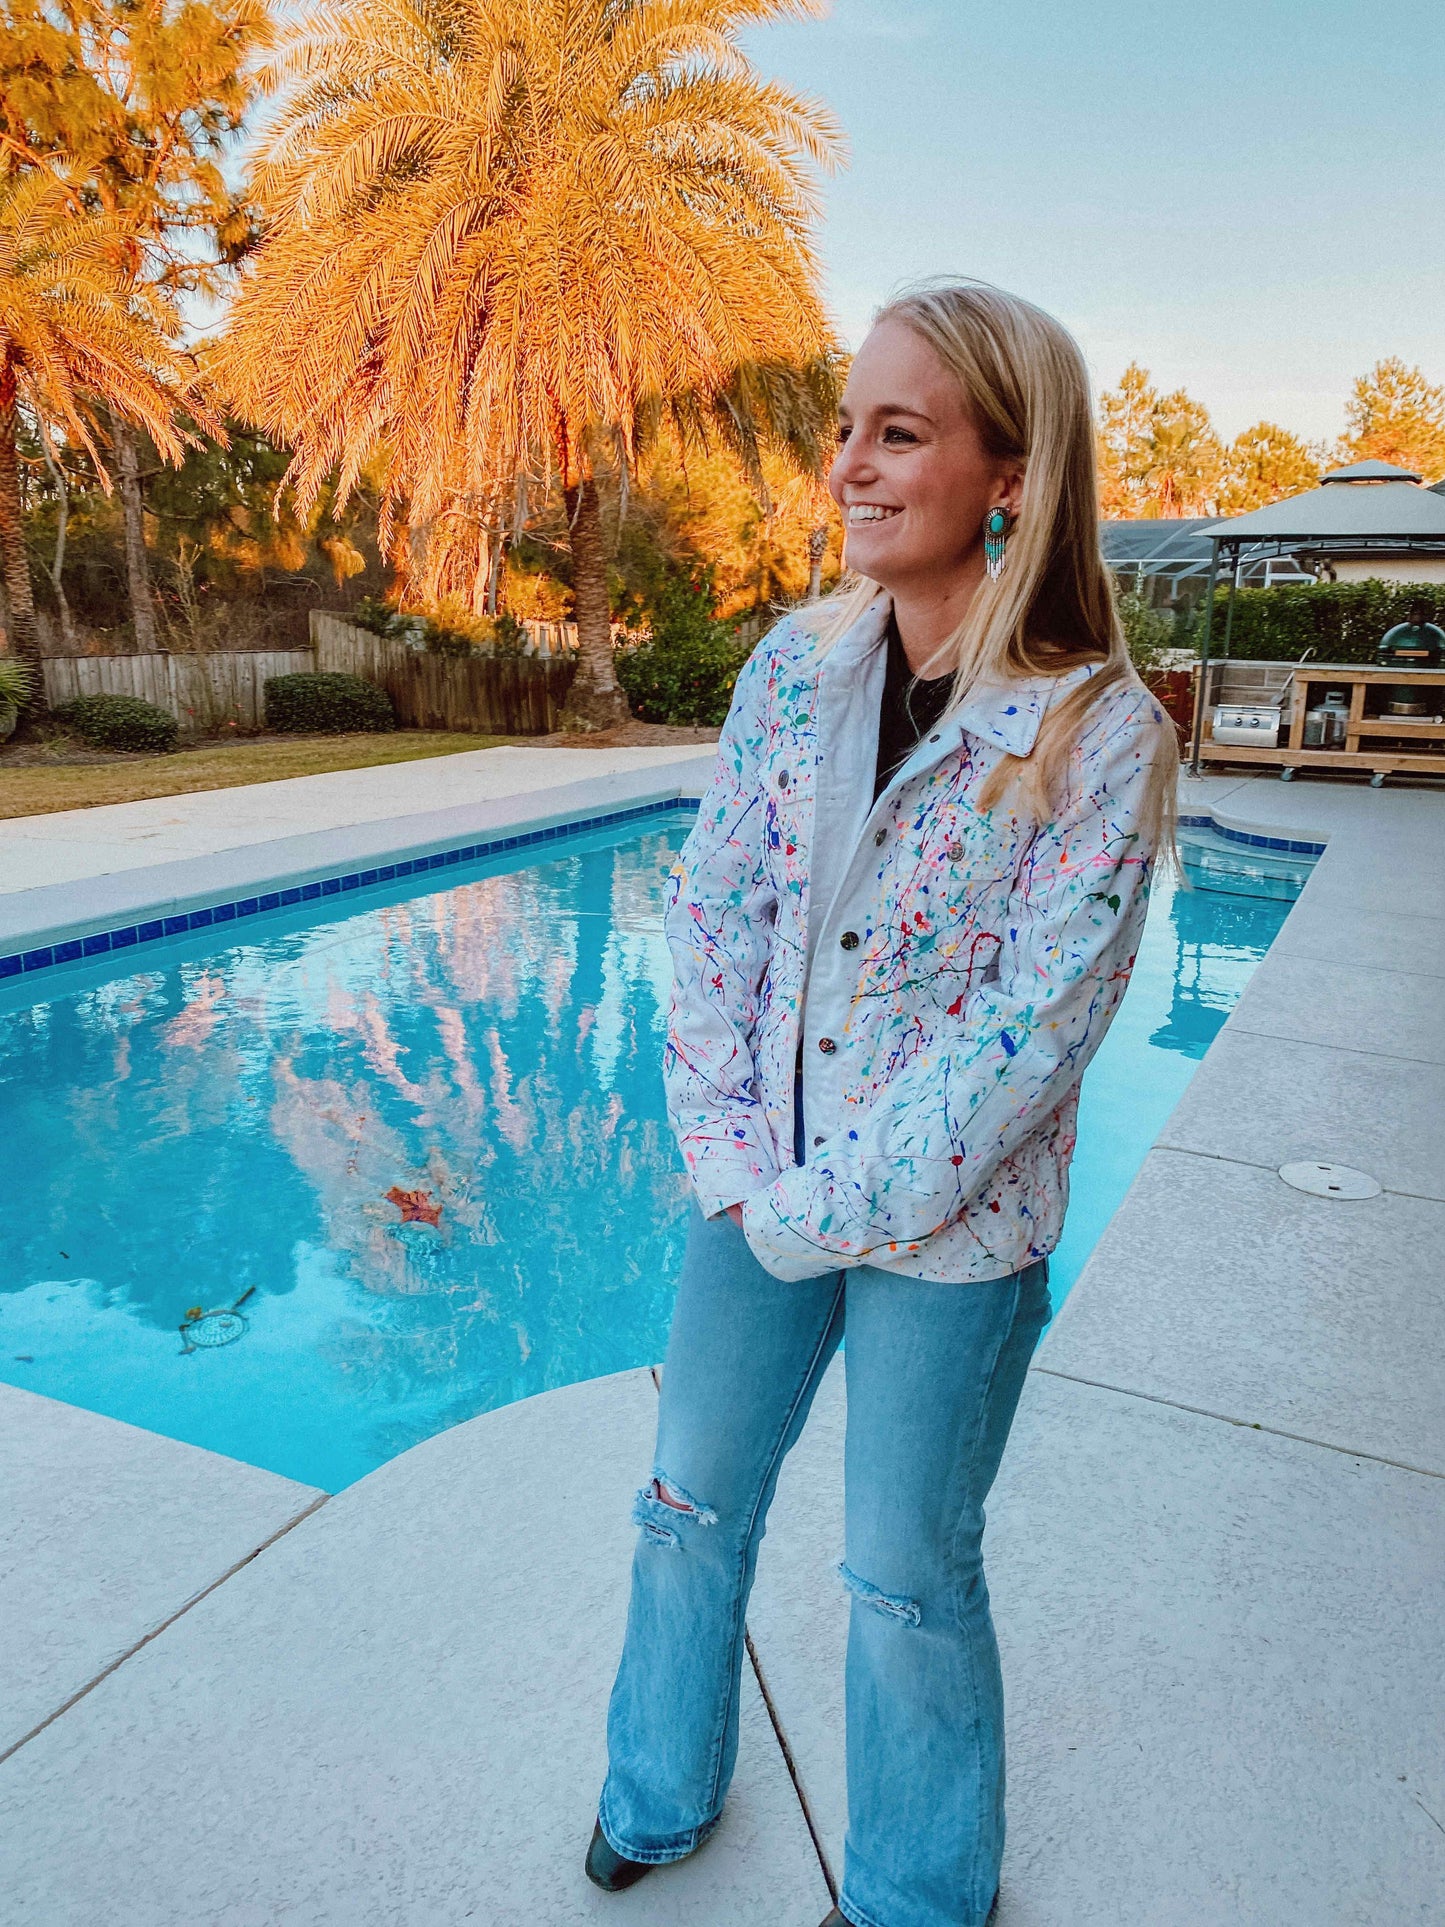 This is a custom splatter paint denim jacket  that has been custom splattered painted with rainbow colors. This is a custom painted jean jacket.